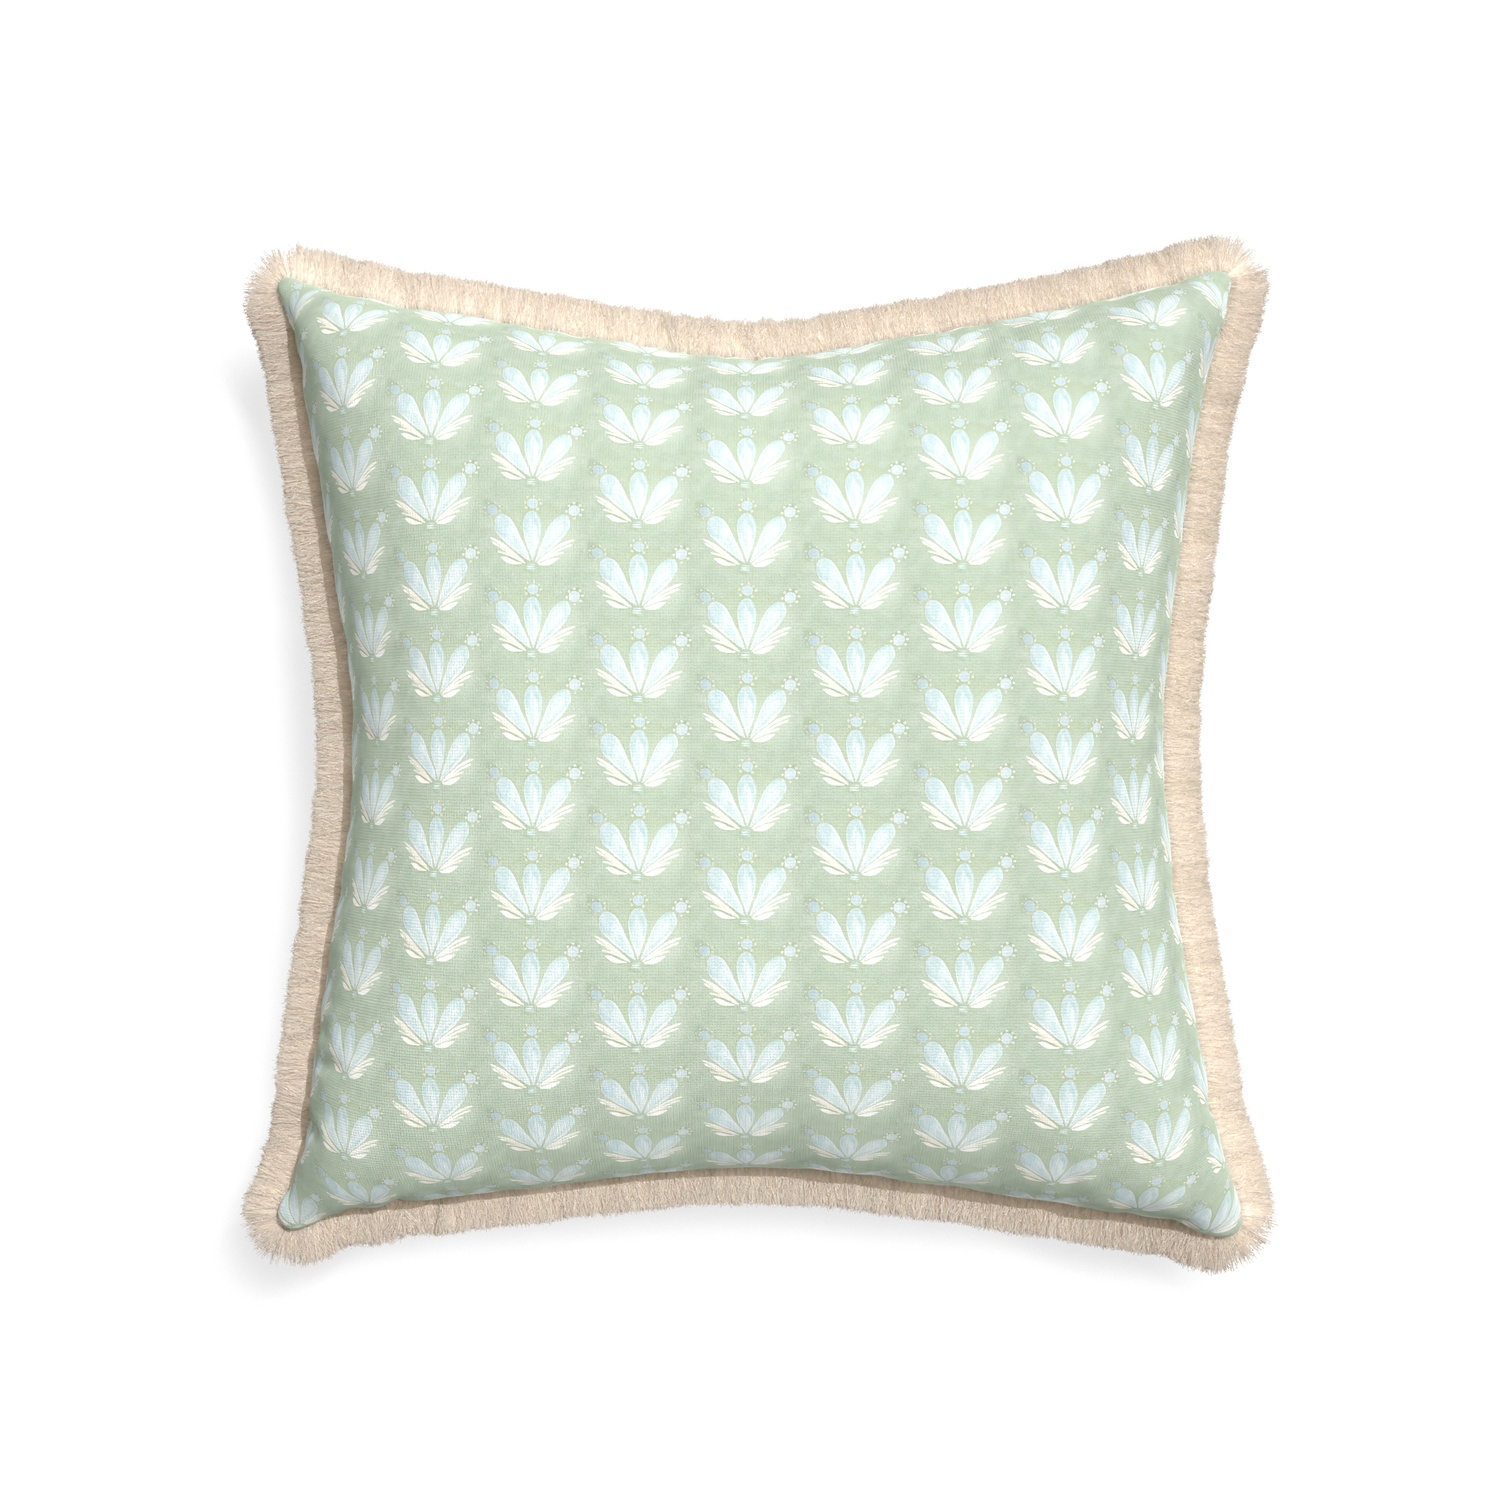 22-square serena sea salt custom blue & green floral drop repeatpillow with cream fringe on white background